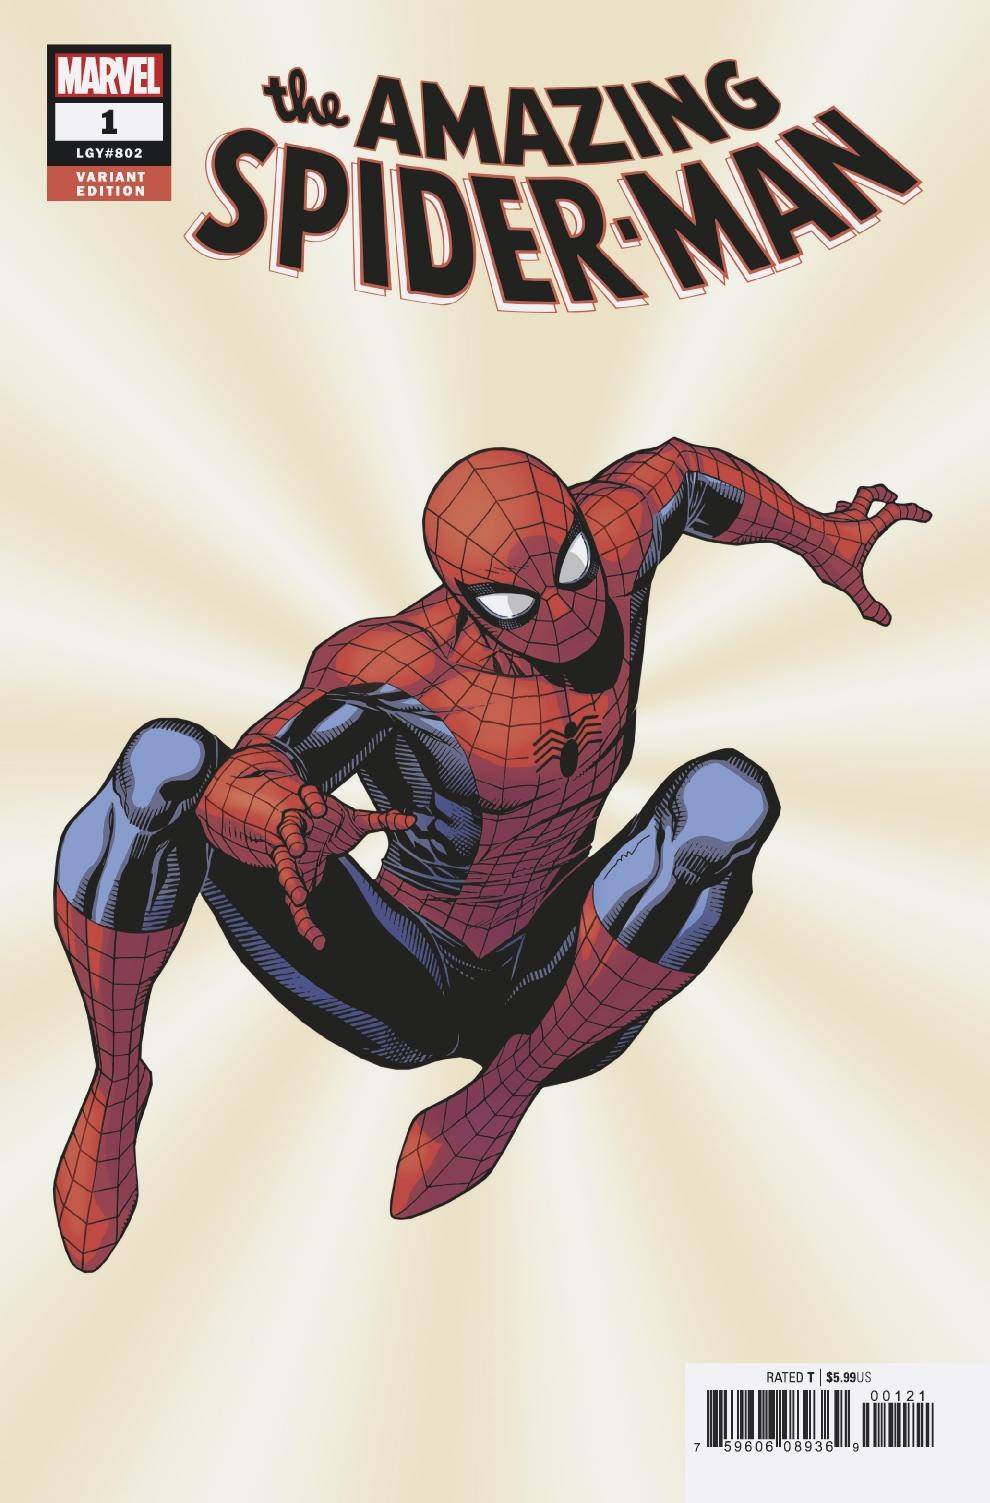 Amazing Spider-Man Vol.5 #01 (LGY #802) Variant Edition (Cheung) [2018]